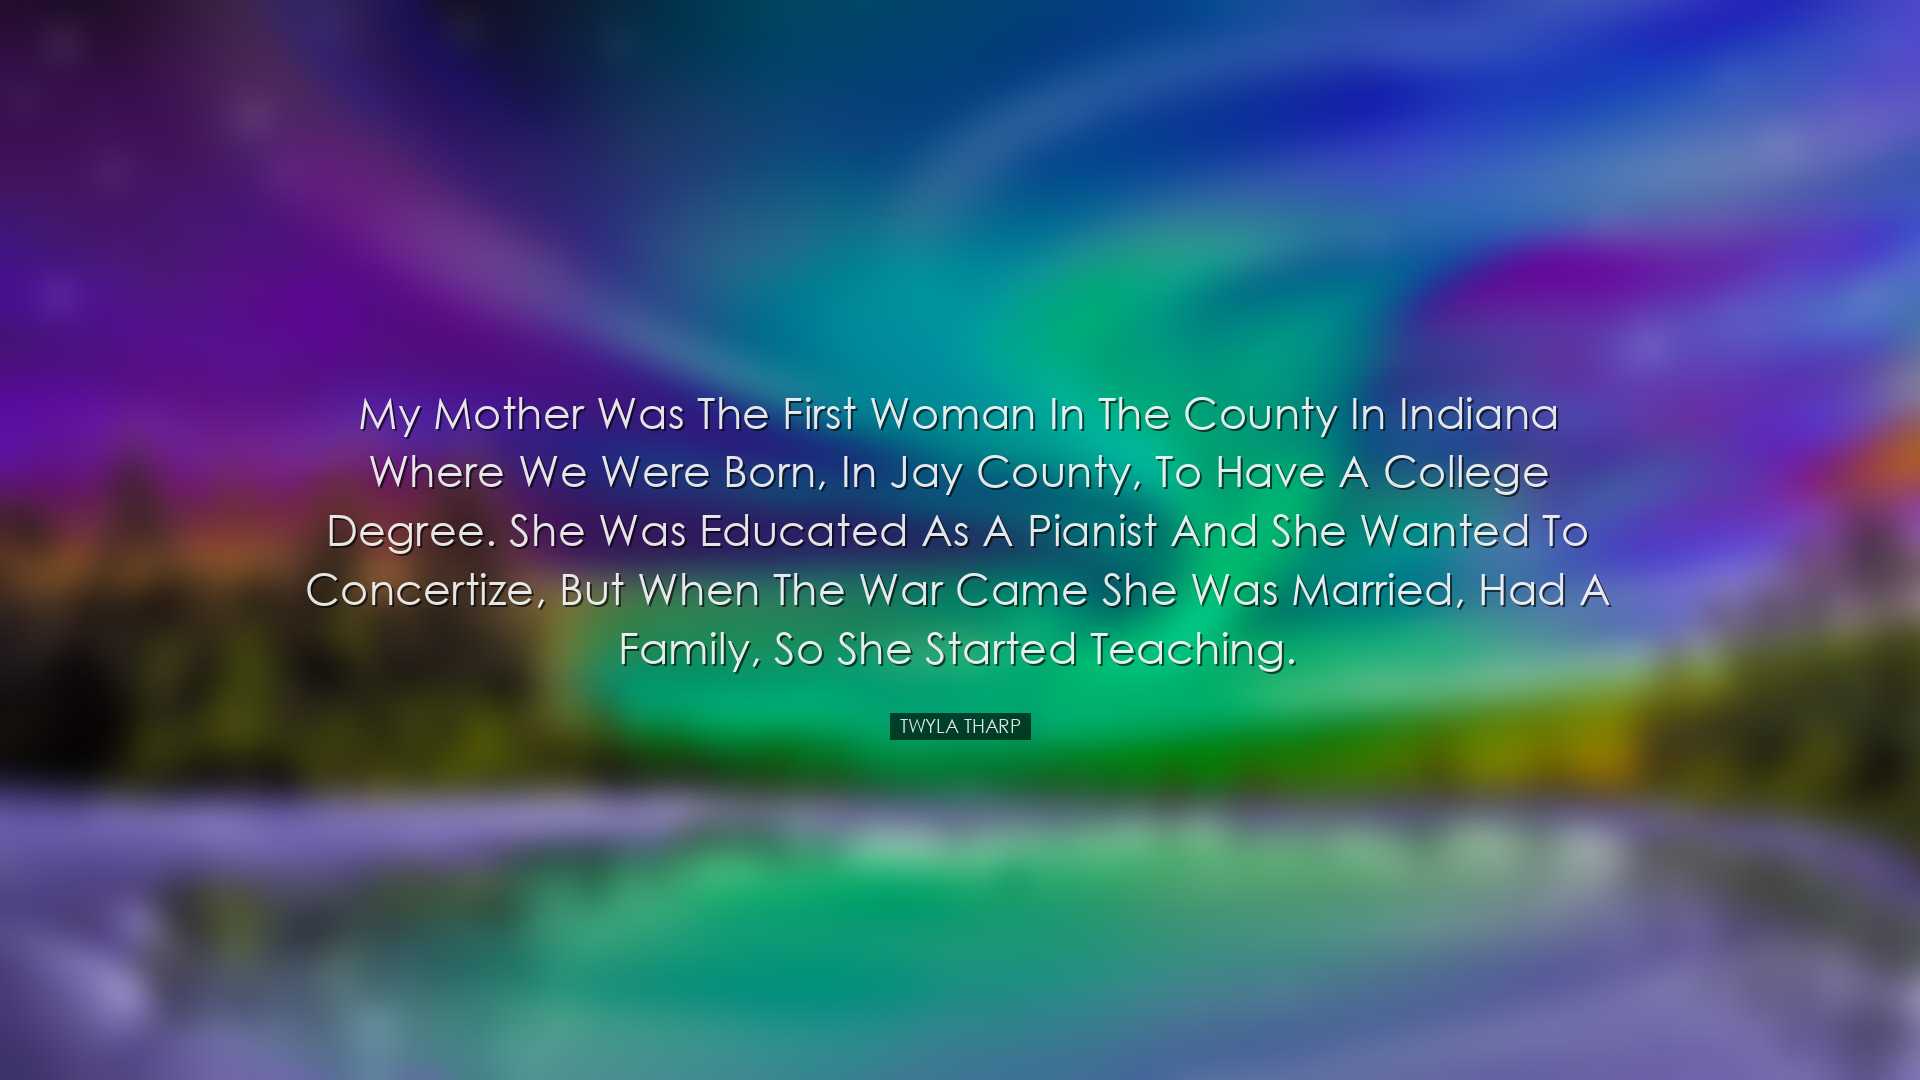 My mother was the first woman in the county in Indiana where we we